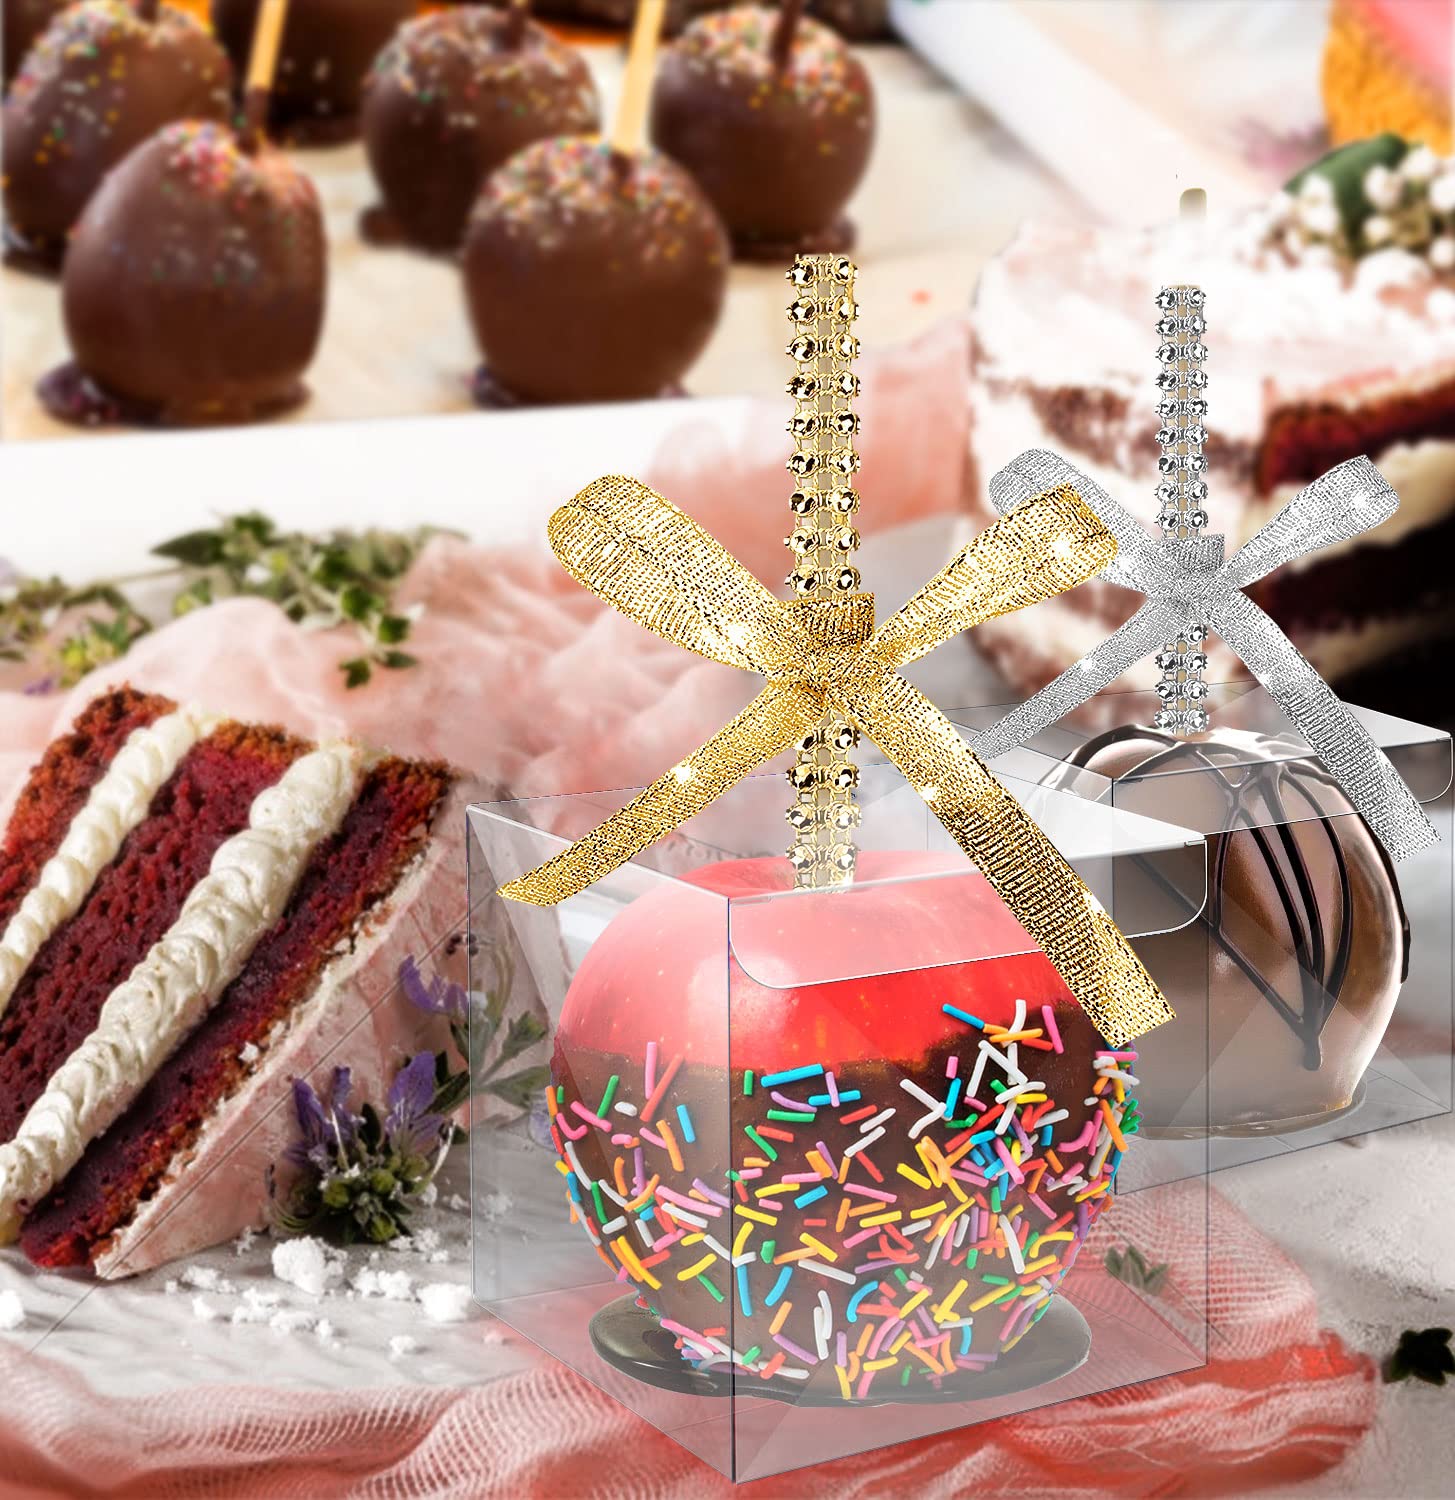 MGWOTH Candy Apple Boxes with Bling Stick Hole Set, 20 Pack Caramel Apple Wrapping Kit with Clear Containers & Rhinestone Bamboo Skewers & Glitter Ribbons,Decorative Top for Cake Pop Chocolate Treat